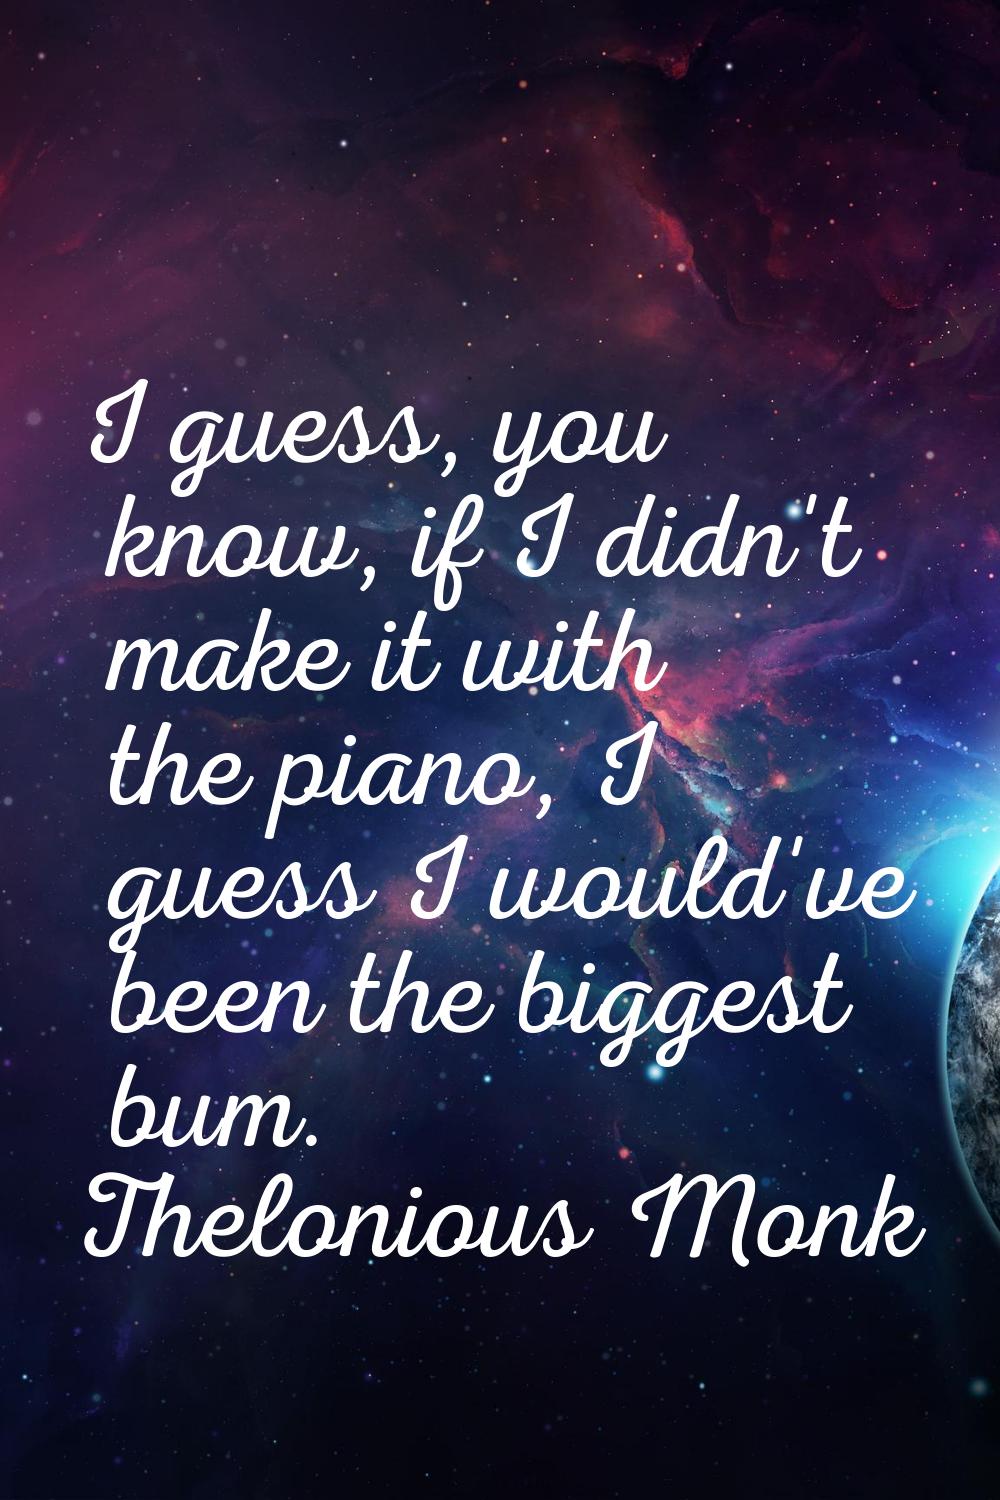 I guess, you know, if I didn't make it with the piano, I guess I would've been the biggest bum.